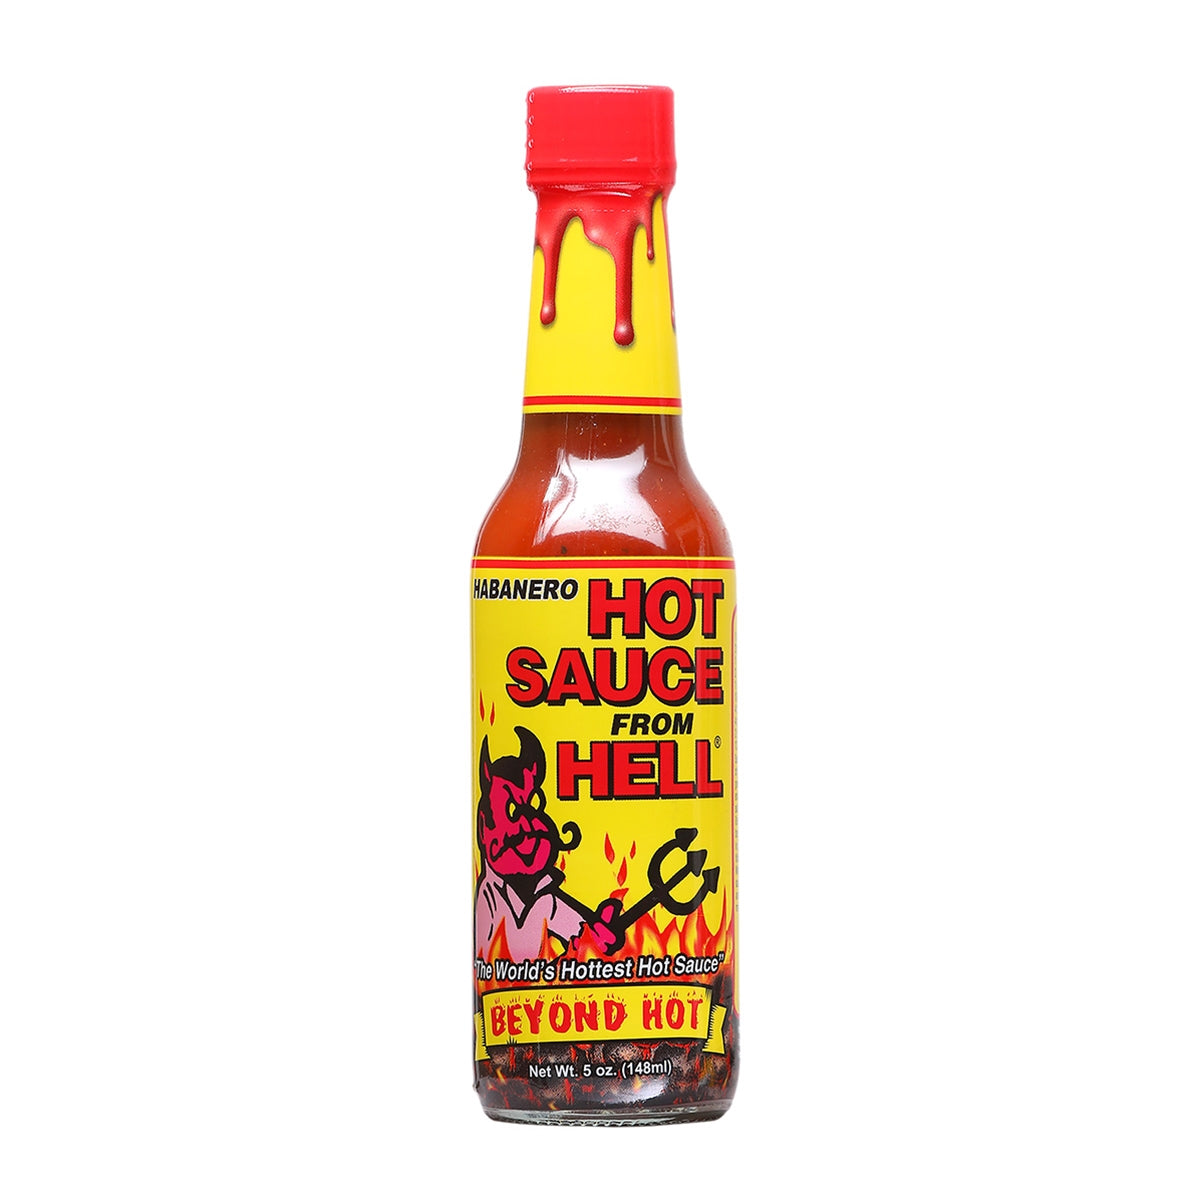 Hot Sauce From Hell Yellow And Red Label 5 Oz Heat 9 798 6979